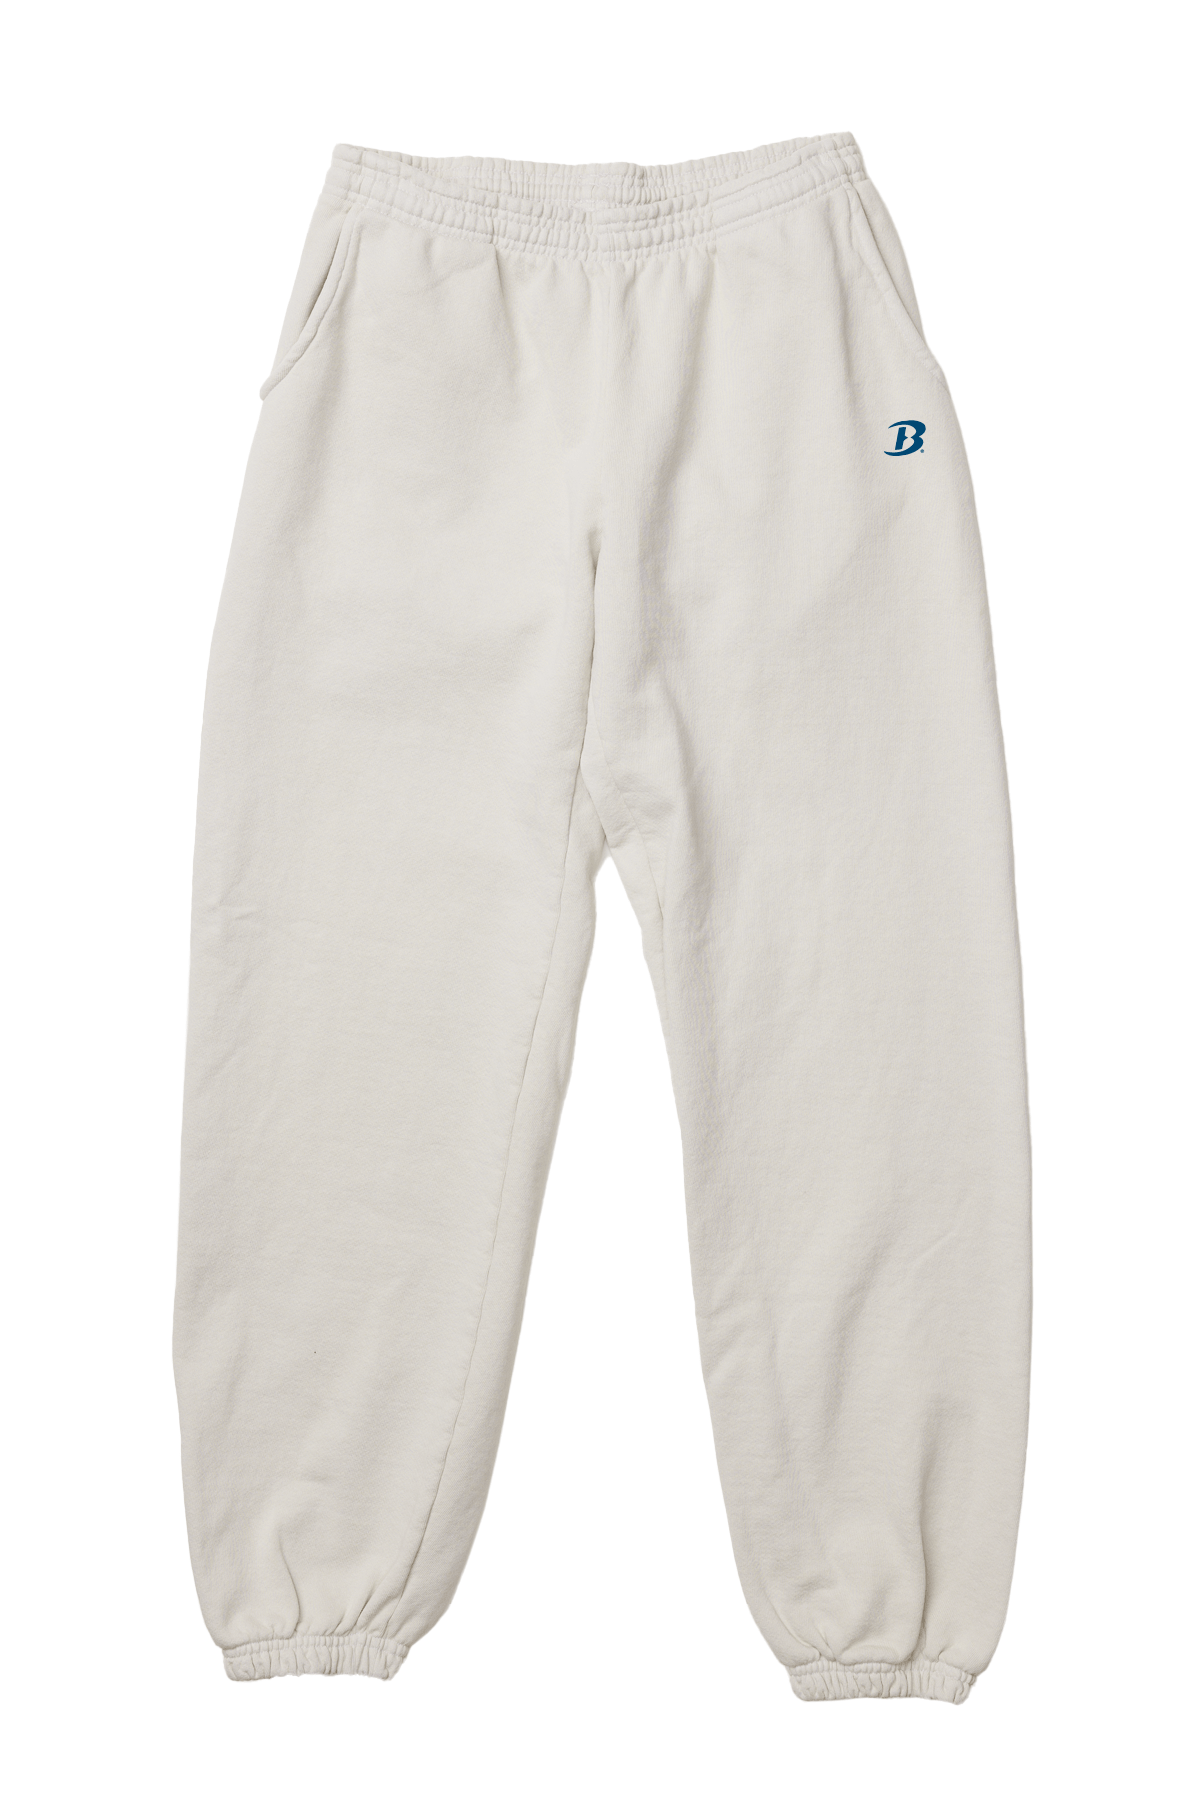 Boathouse Unisex Heavy Weight Sweatpants Cement / Small